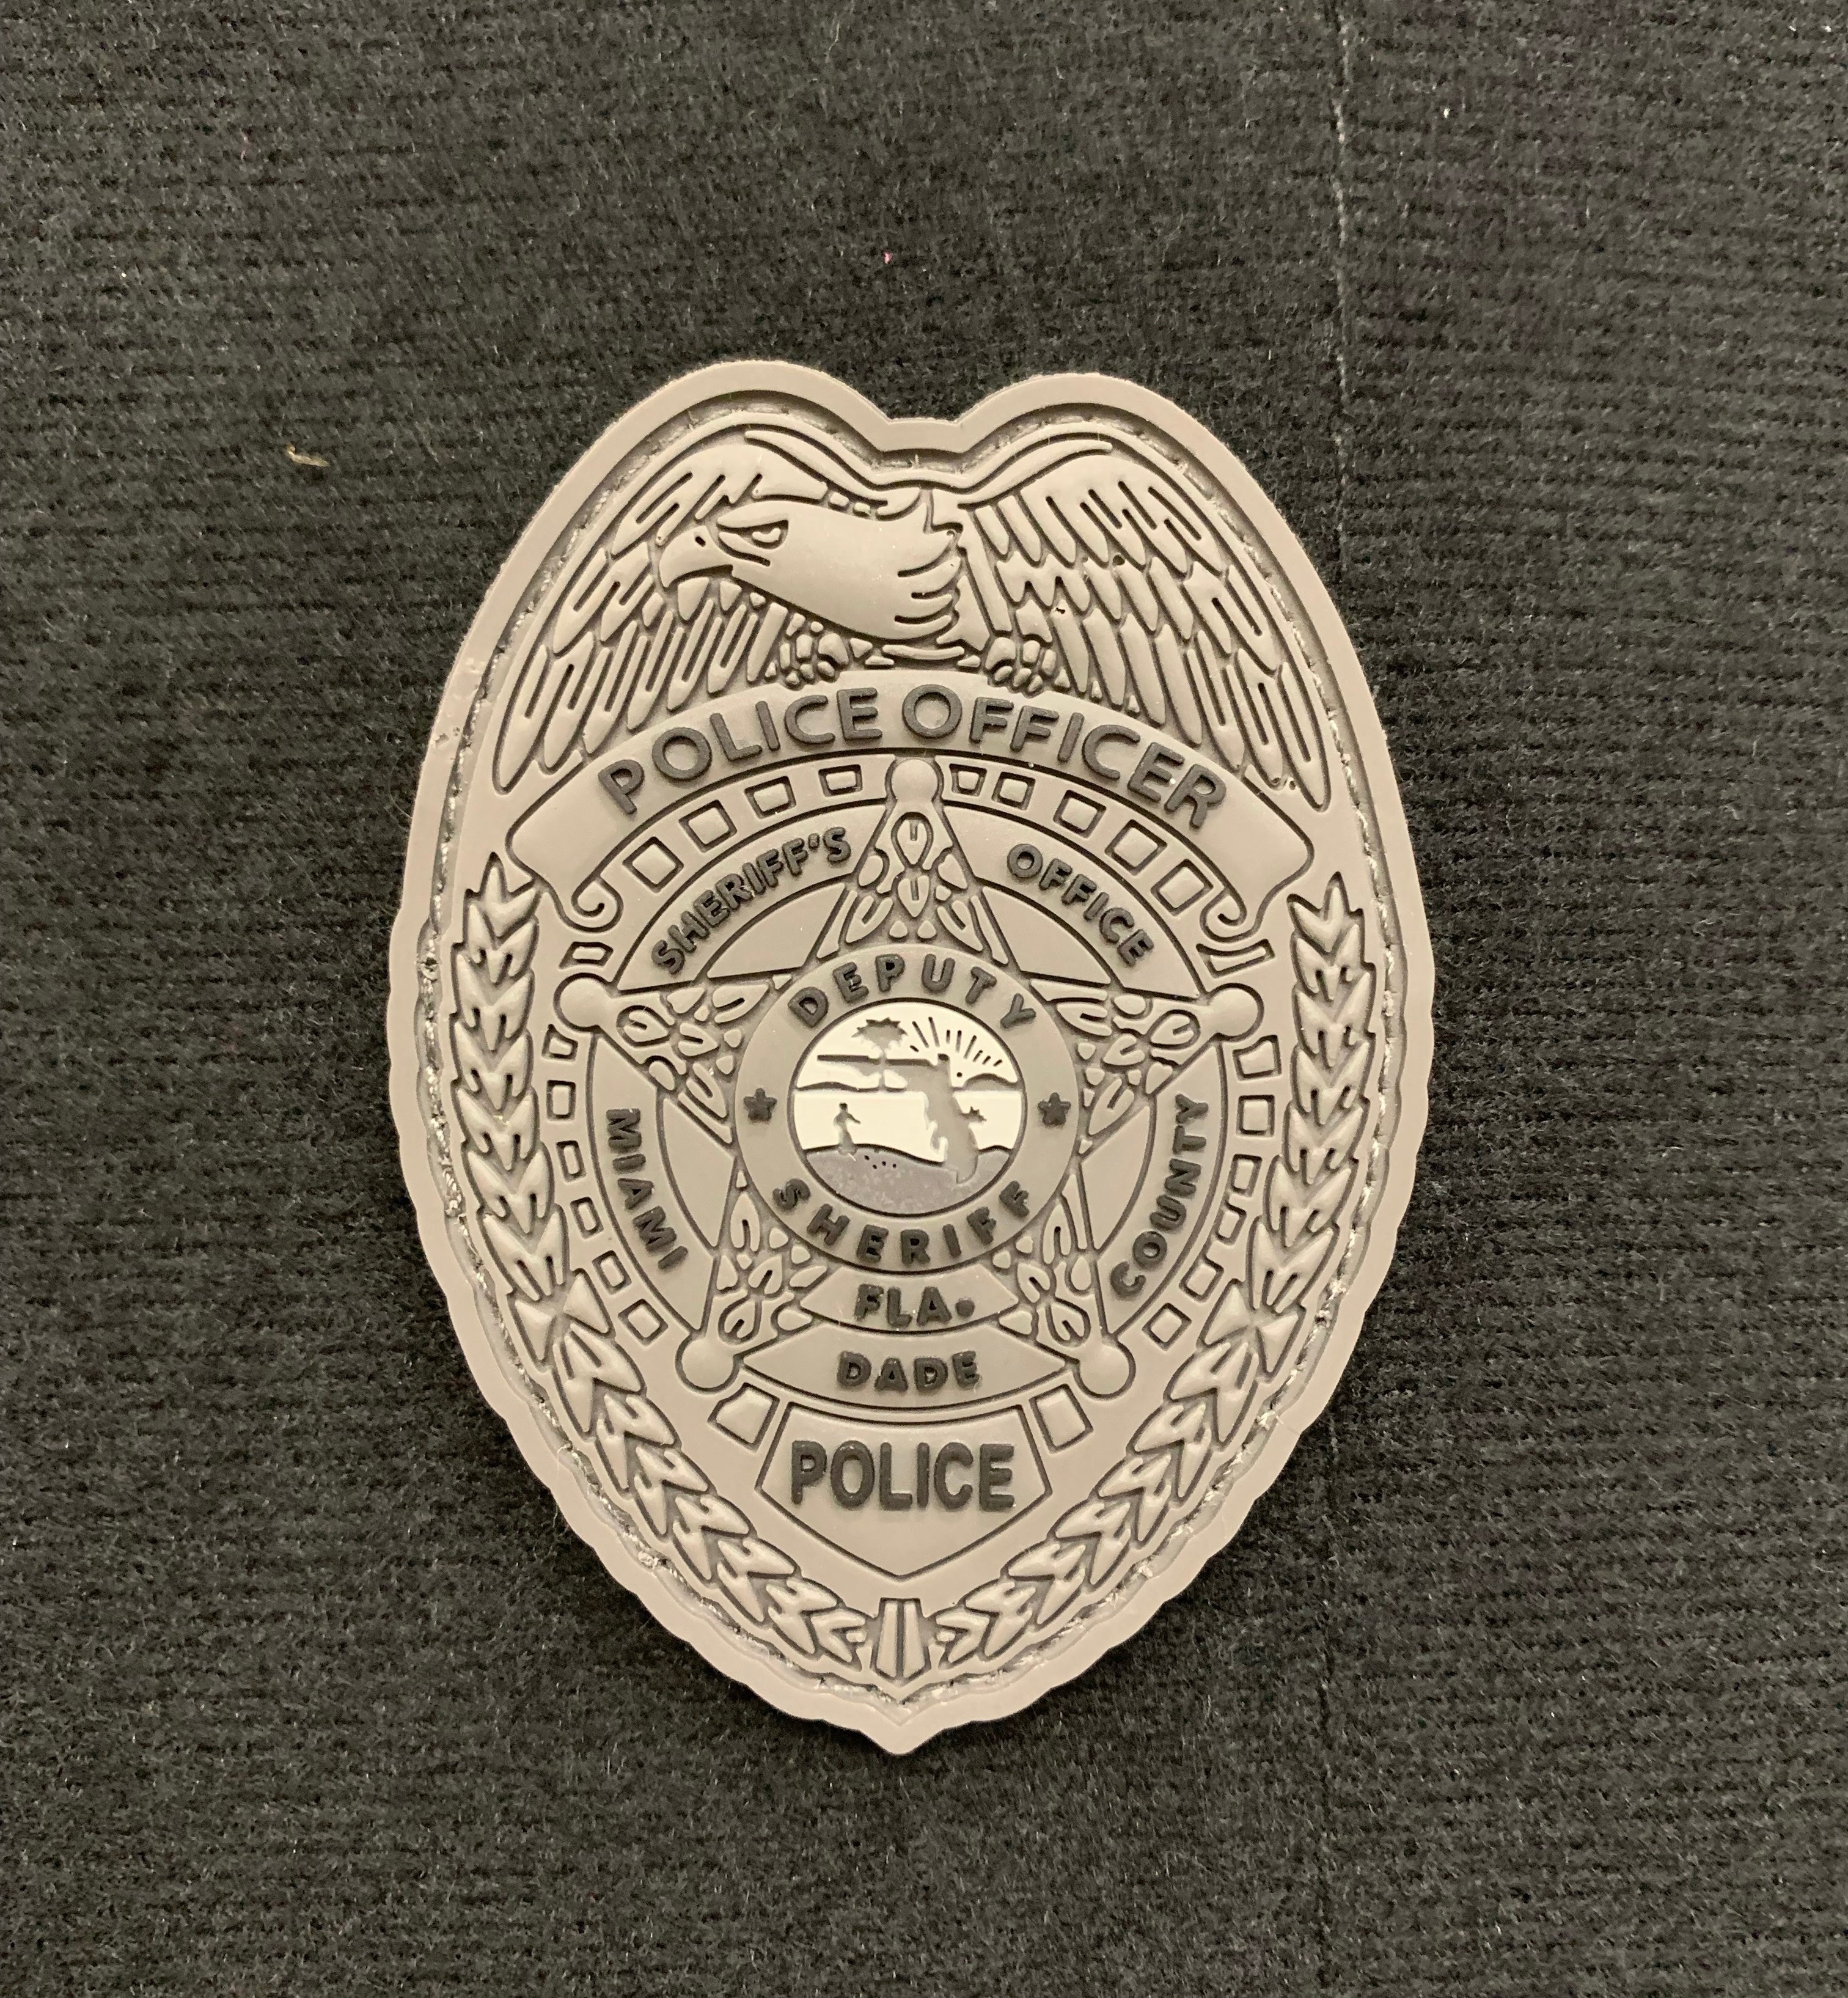 The City Of Miami Police Property Florida Patch